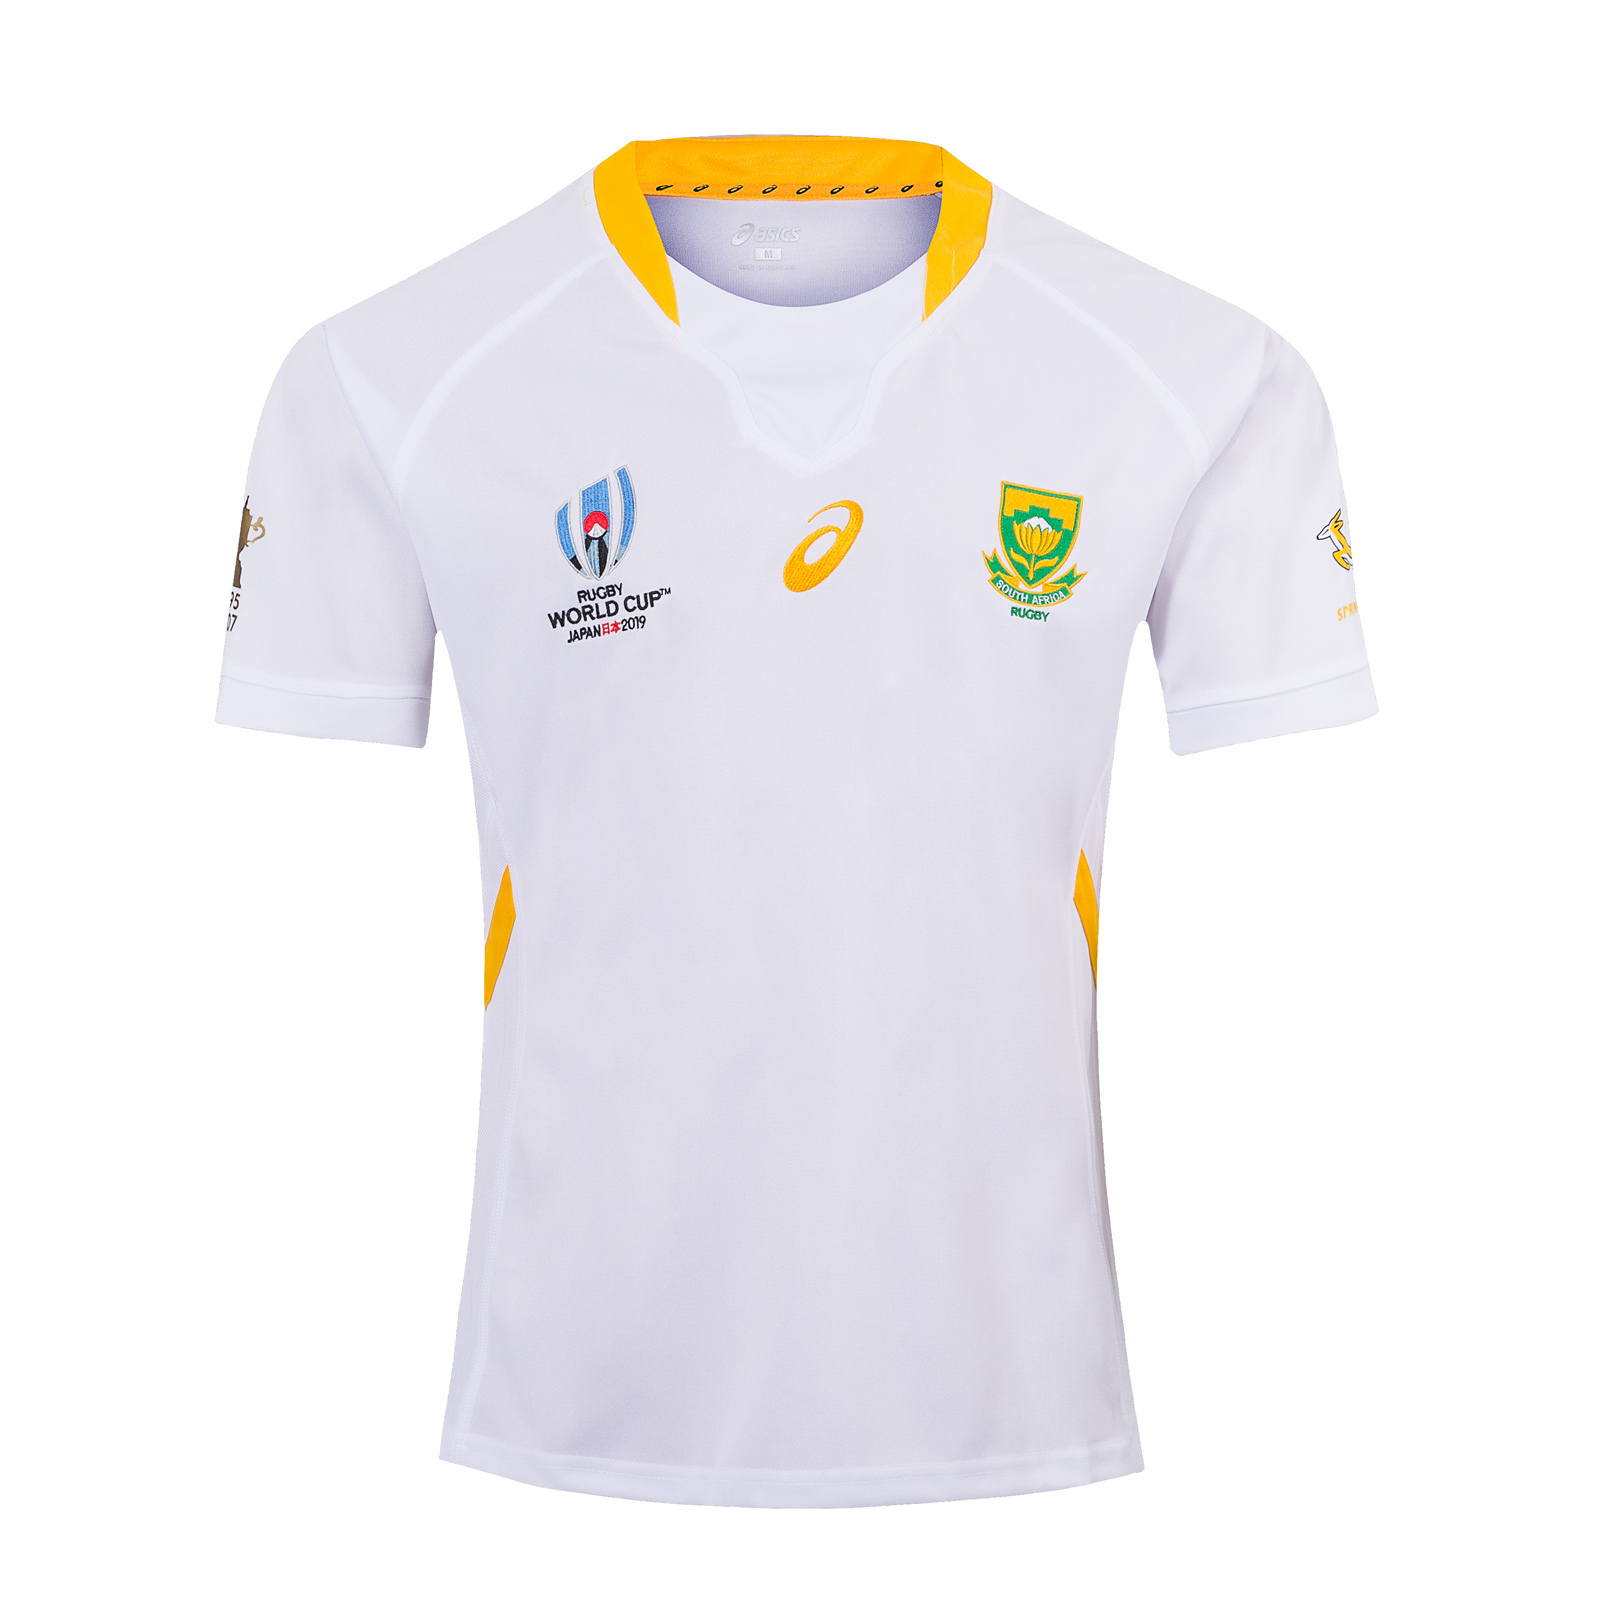 2018/2019 South Africa home rugby jersey shirt S-3XL 